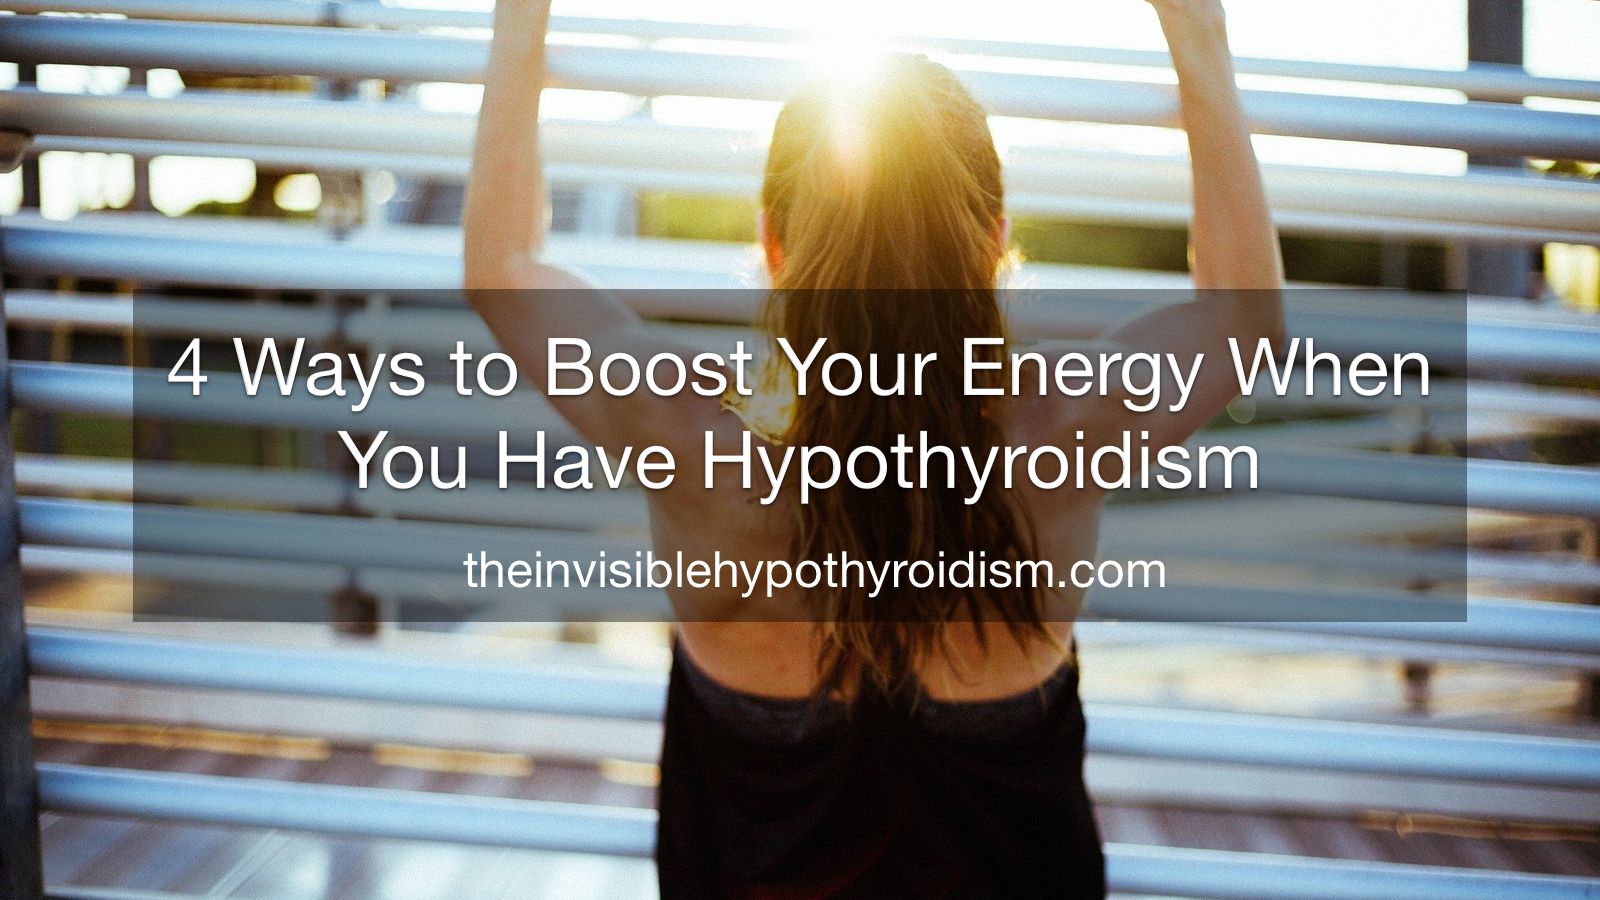 4 Ways to Boost Your Energy When You Have Hypothyroidism